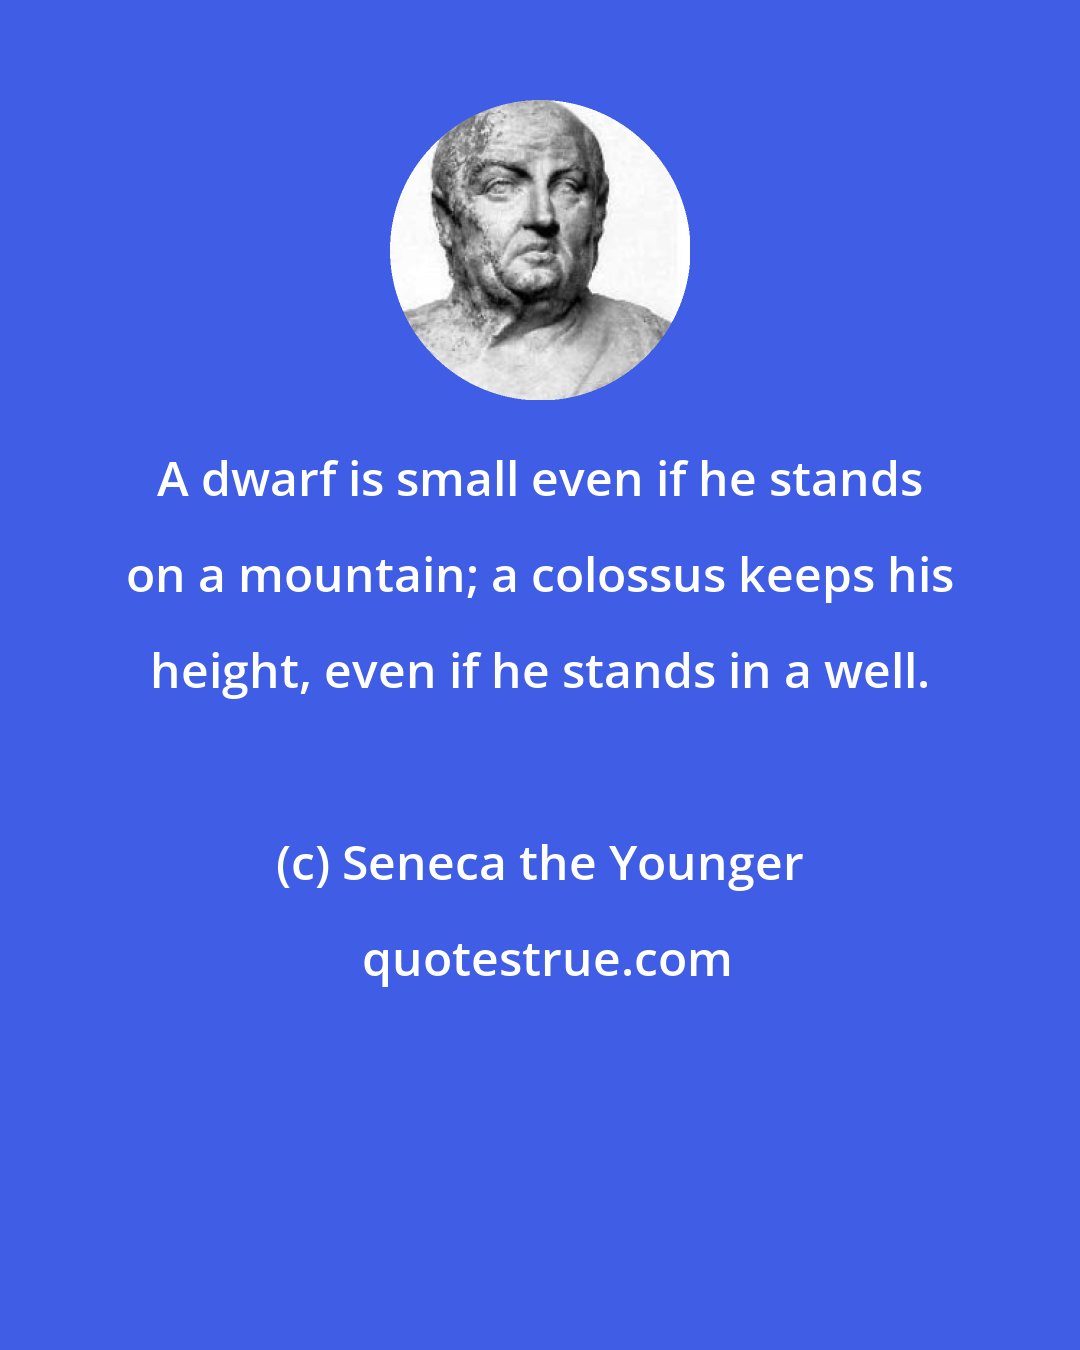 Seneca the Younger: A dwarf is small even if he stands on a mountain; a colossus keeps his height, even if he stands in a well.